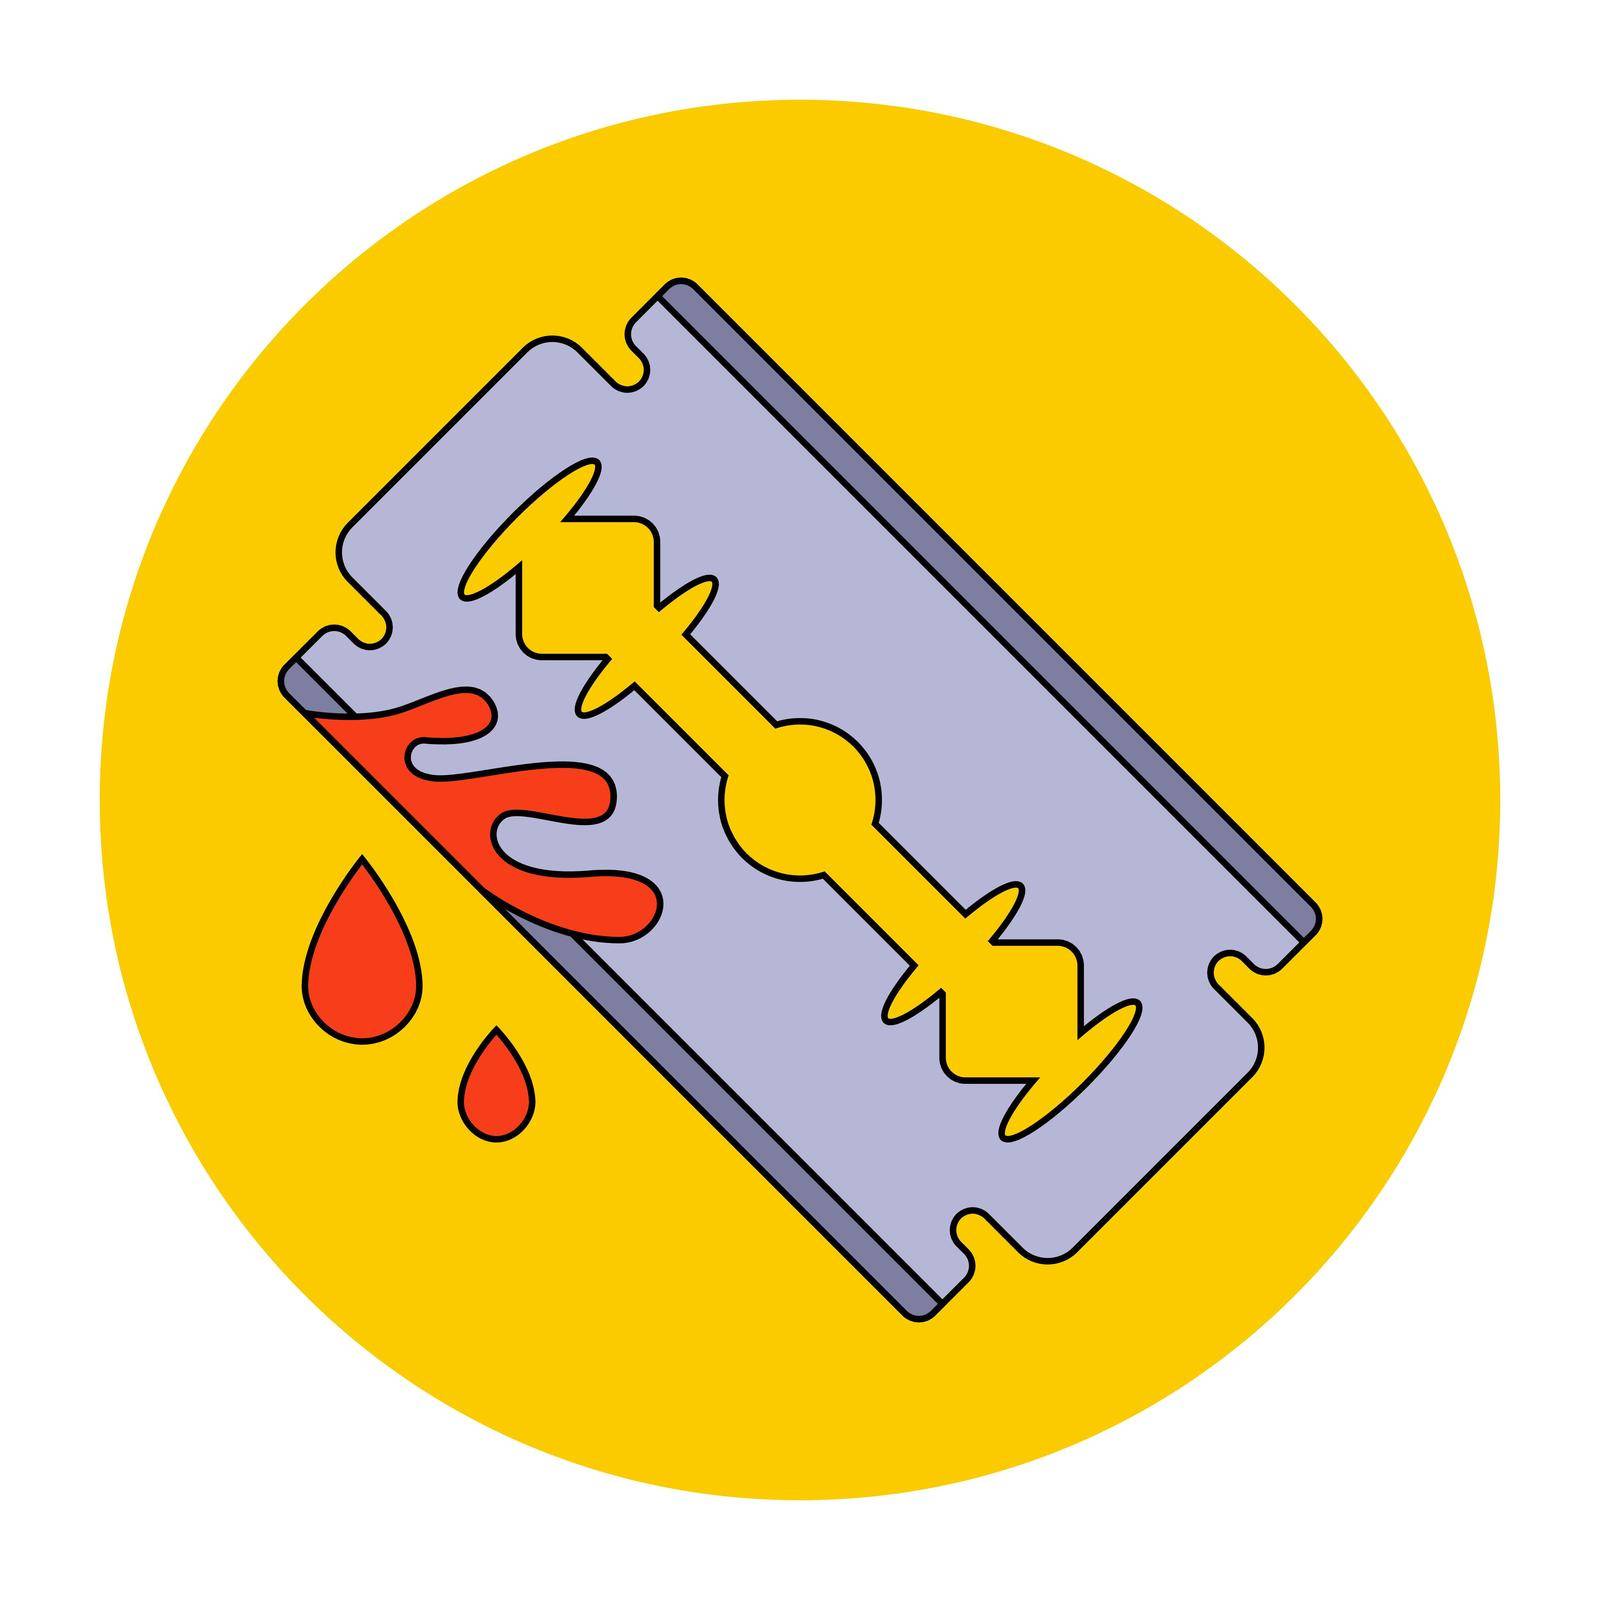 unsuccessful face shaving. suicide attempt with a bloody wound. Flat vector illustration